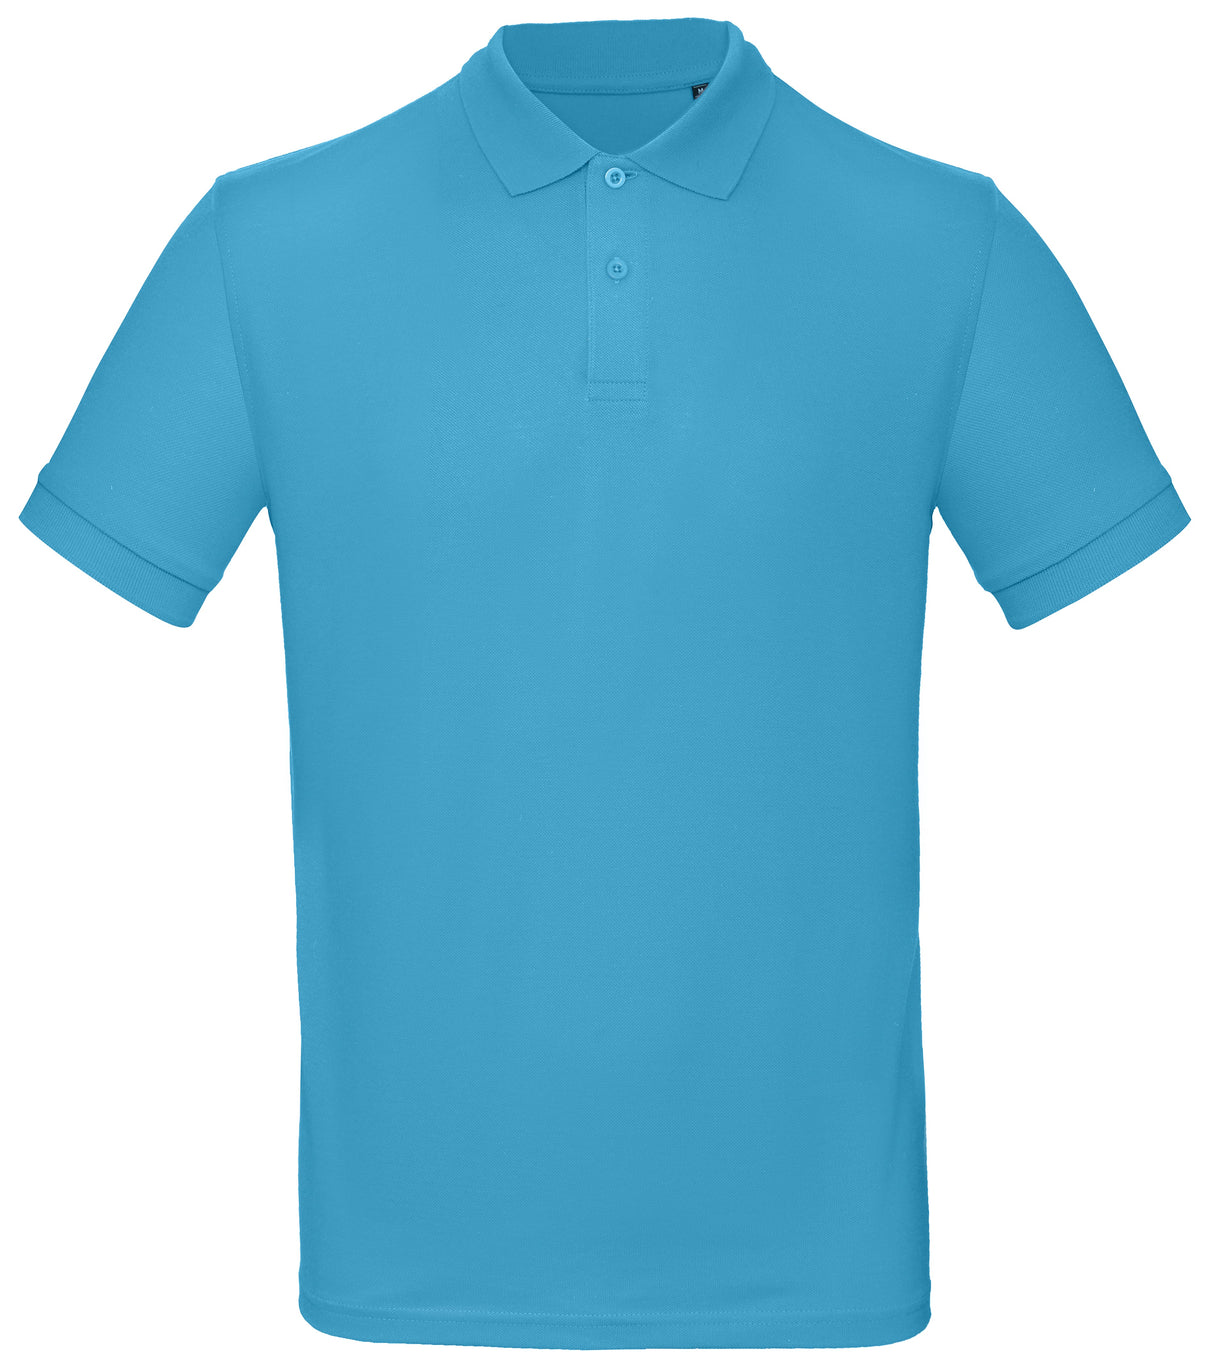 B&C Collection Inspire Polo Men - Very Turquoise